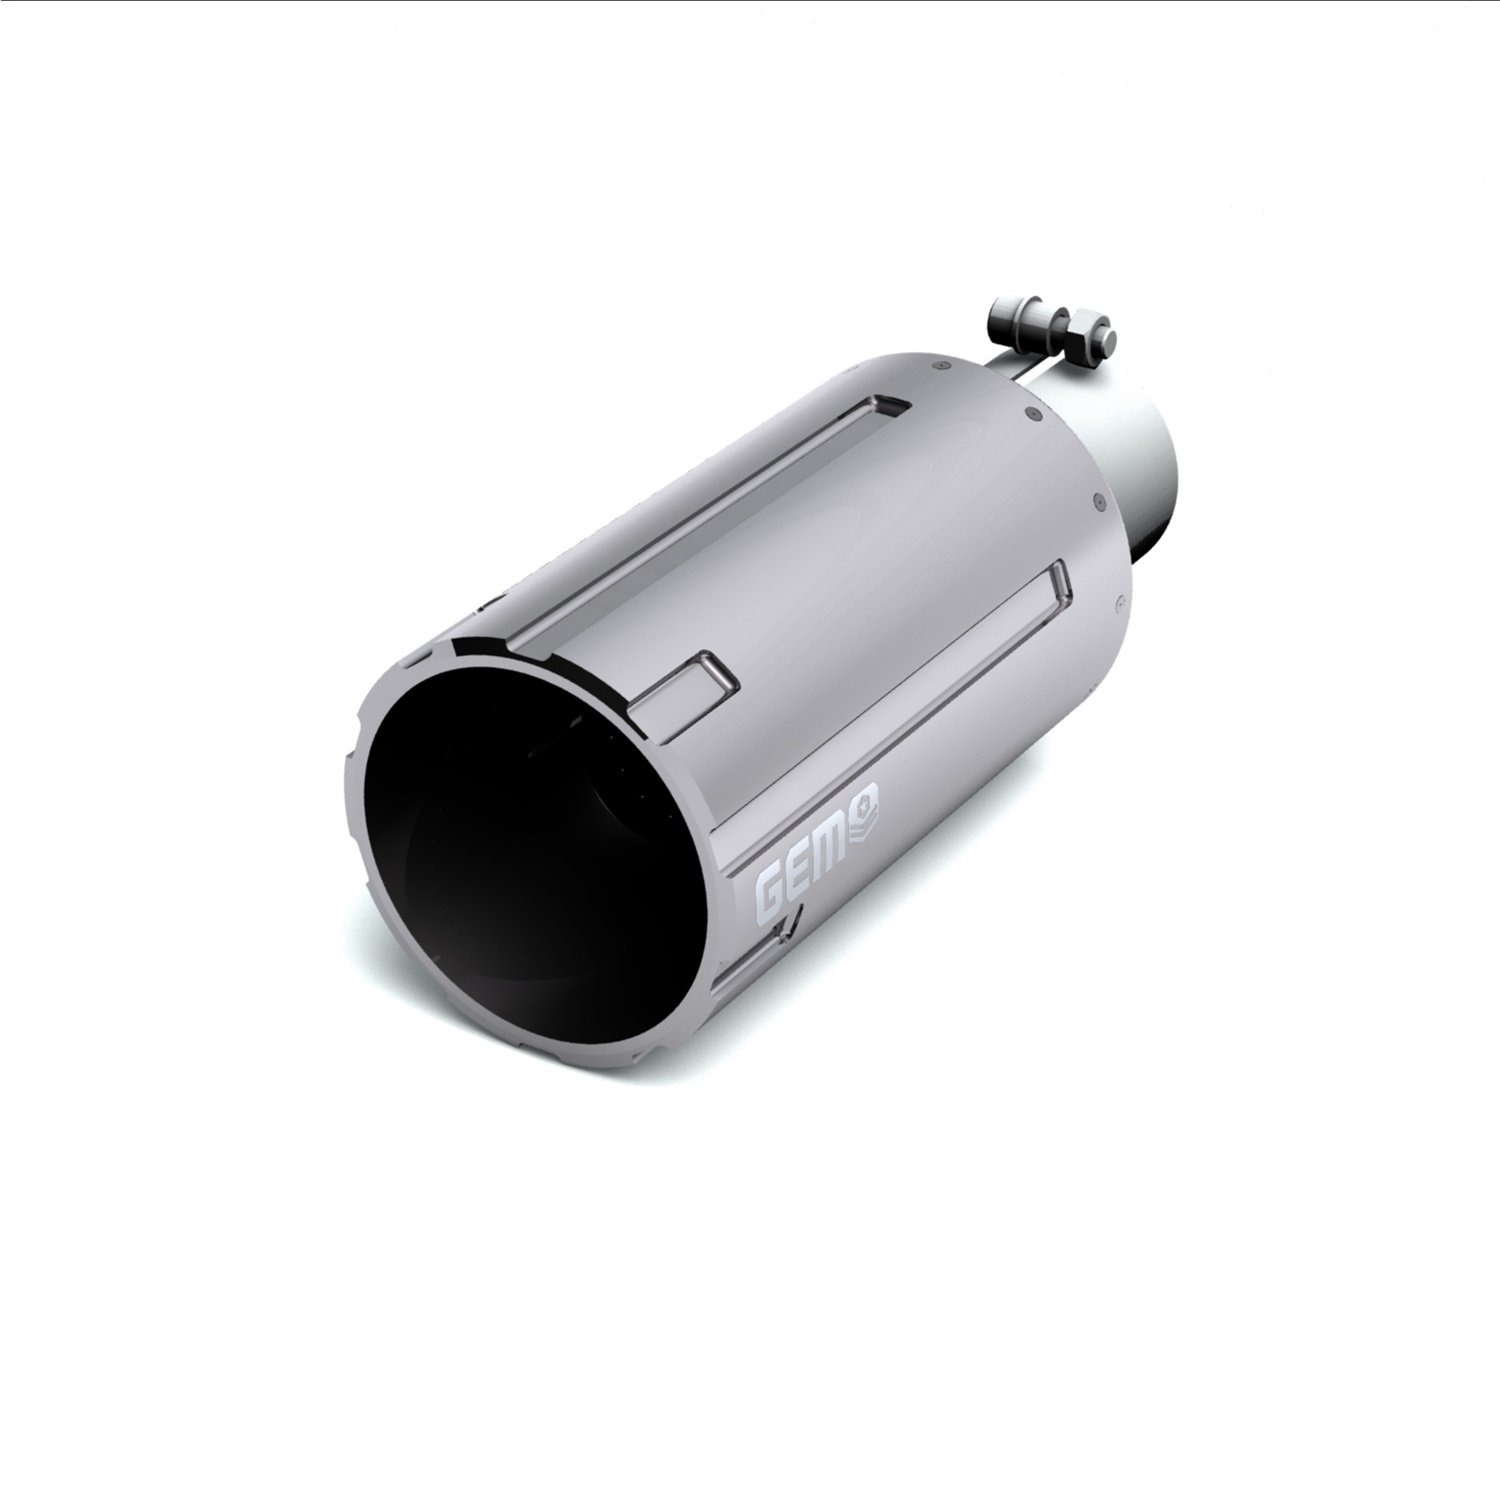 GEM Billet Exhaust Tip, 2.75 in. Inlet/5 in. Outlet x 12 in. Length, Aluminum/304 Stainless Steel, BARREL Cut [Chrome Finish]